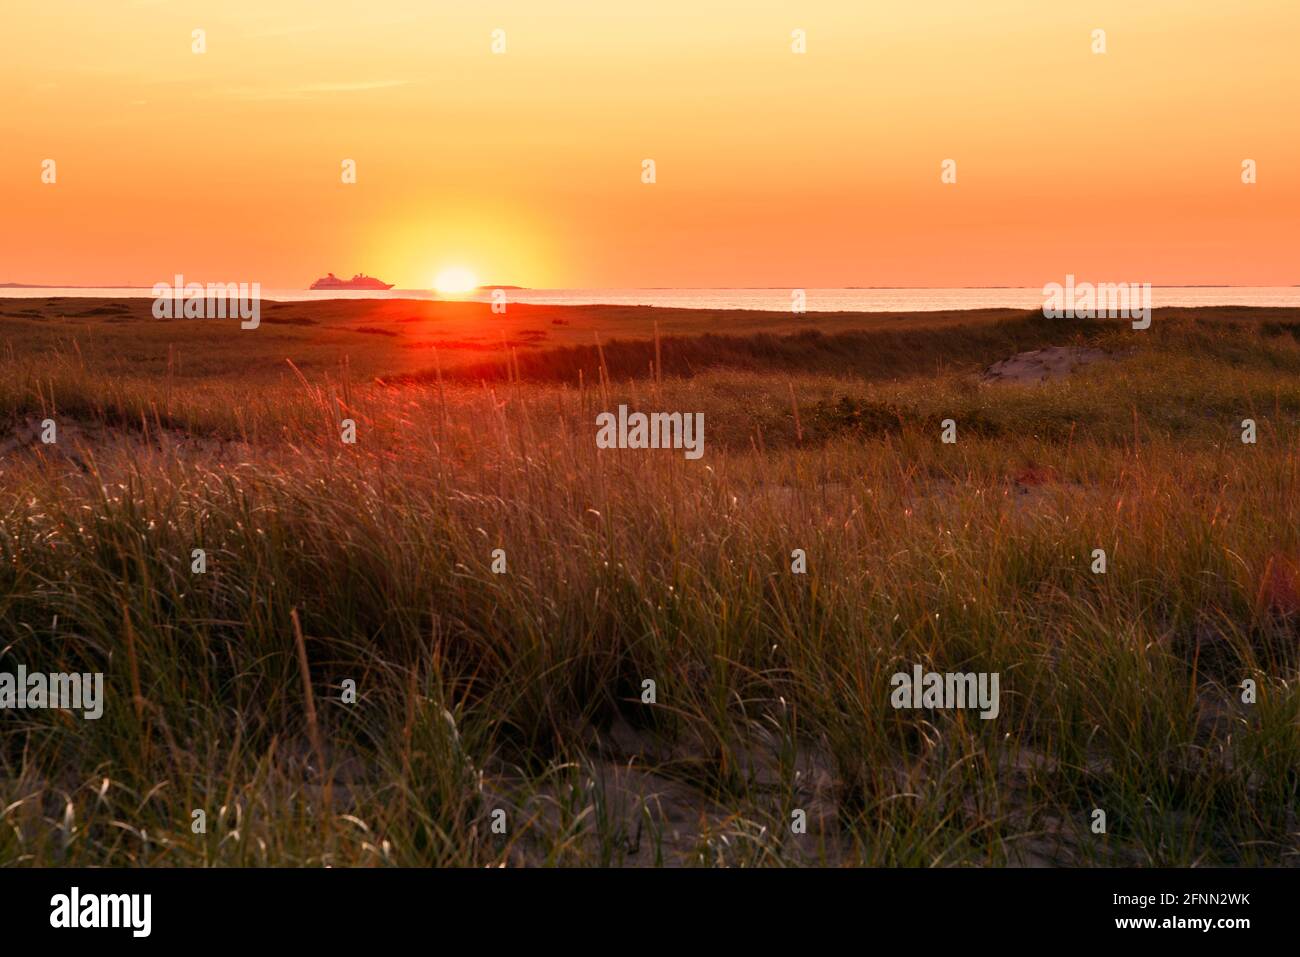 Majestic autumn sunset over the ocean with grassy sand dunes in foreground. A Cruise ship in navigation in visible on horizon. Stock Photo